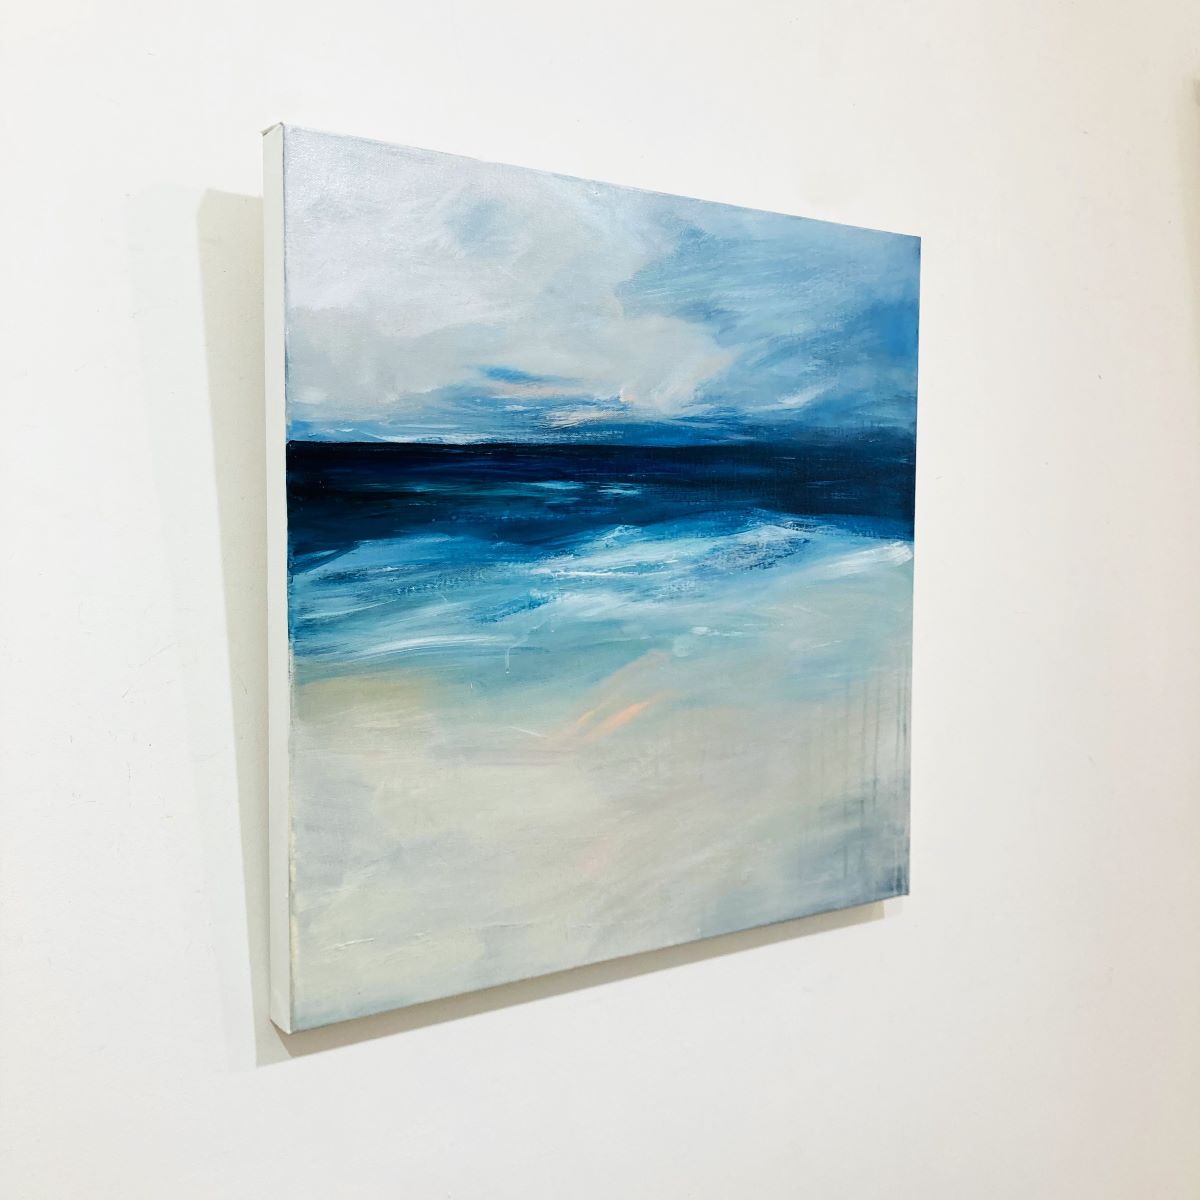 'Sounds of the Sea II' by artist Shona Harcus